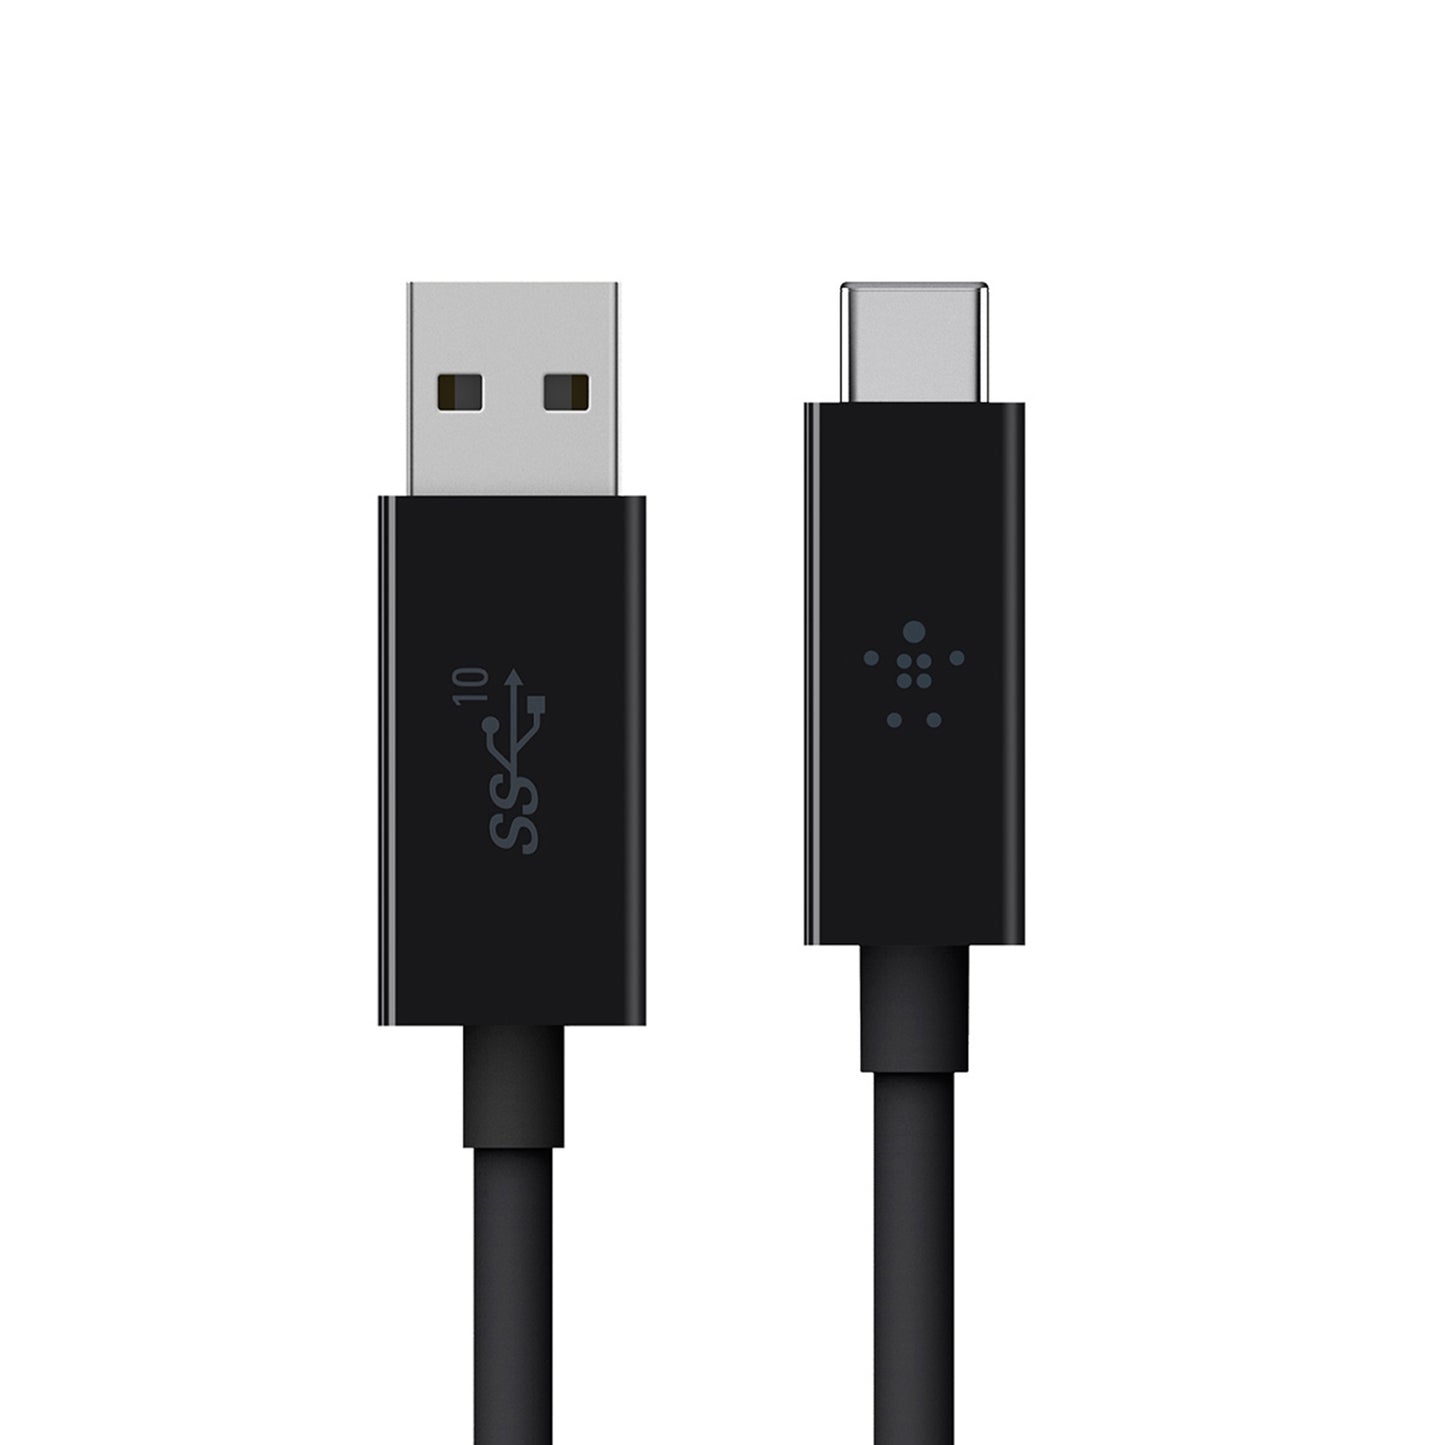 BELKIN USB 3.1 USB-C to USB-A 3.1 Cable - Black